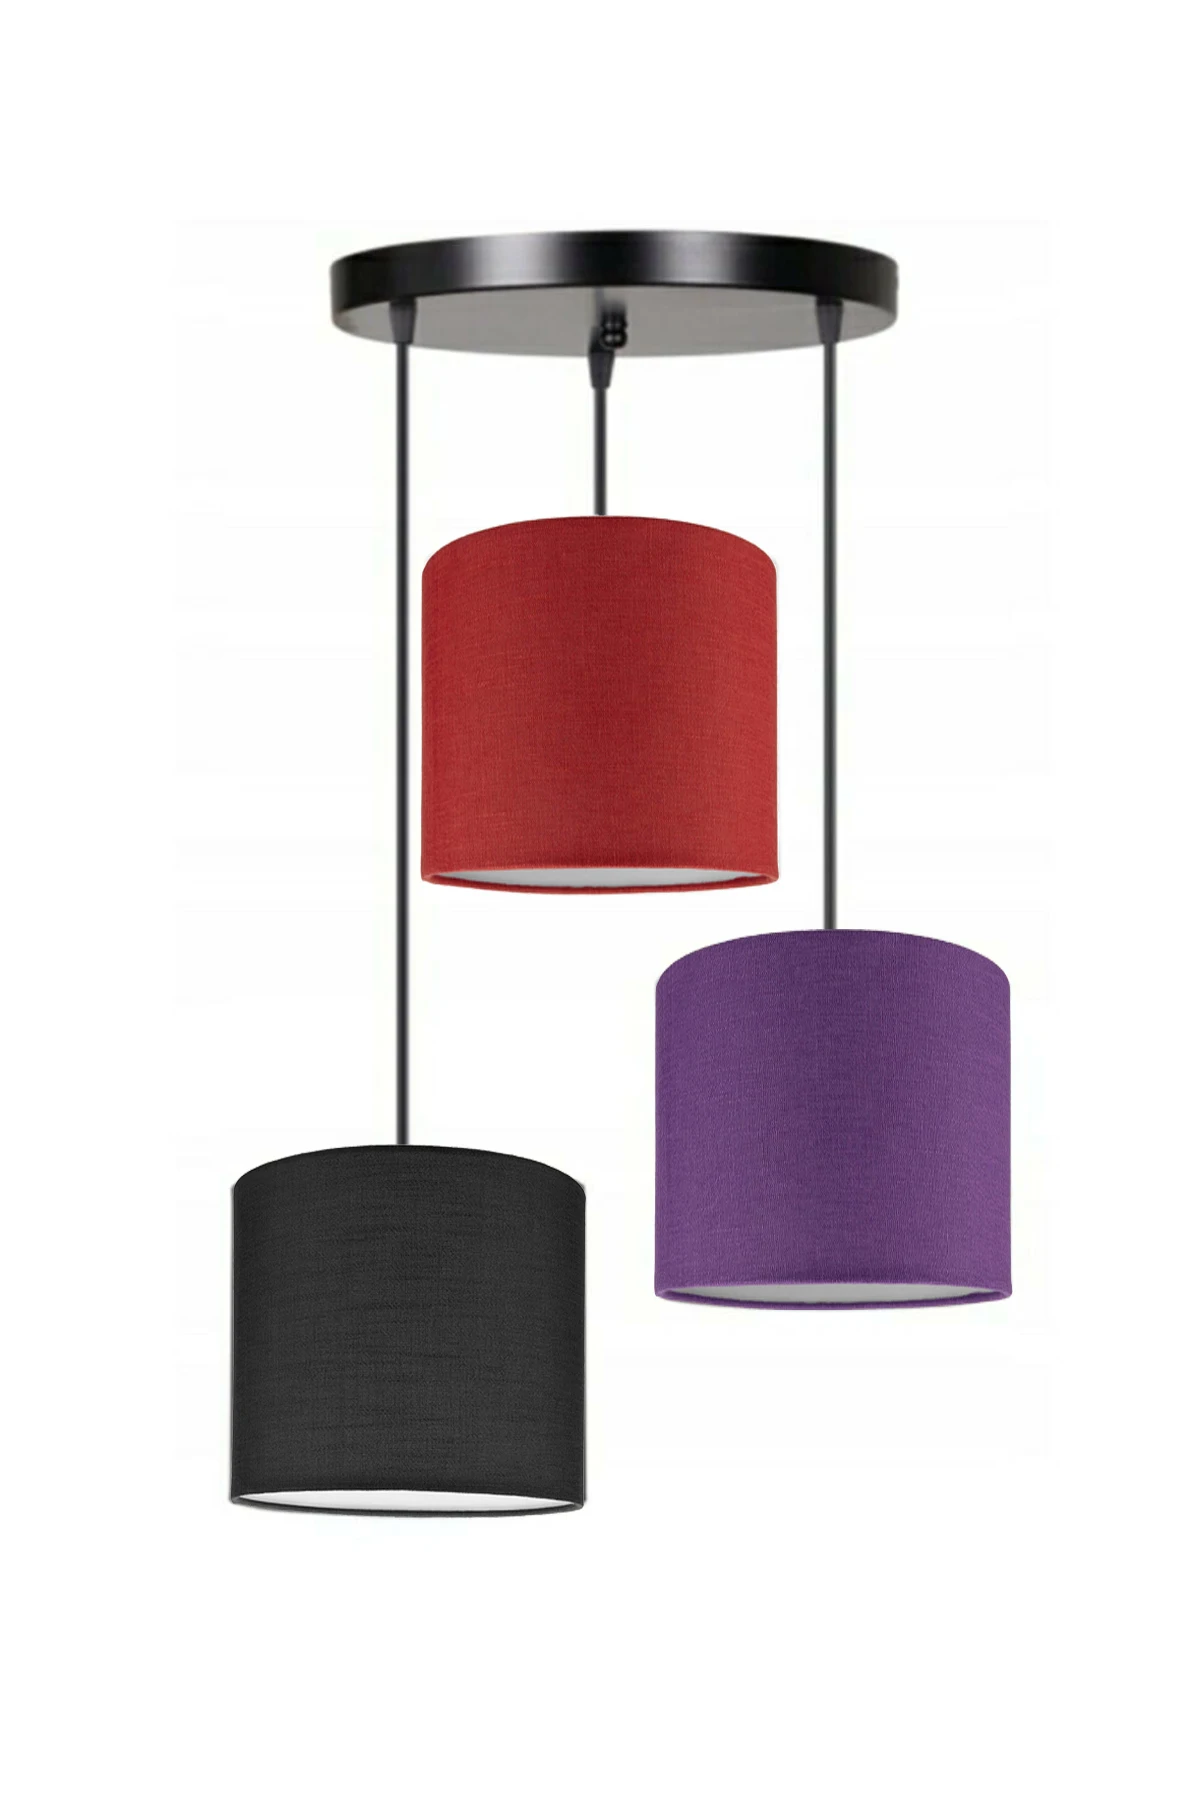 3 Heads Black Red Purple Cylinder Fabric Lampshade Pendant Lamp Chandelier Modern Decorative Design For Home Hotel Office Use